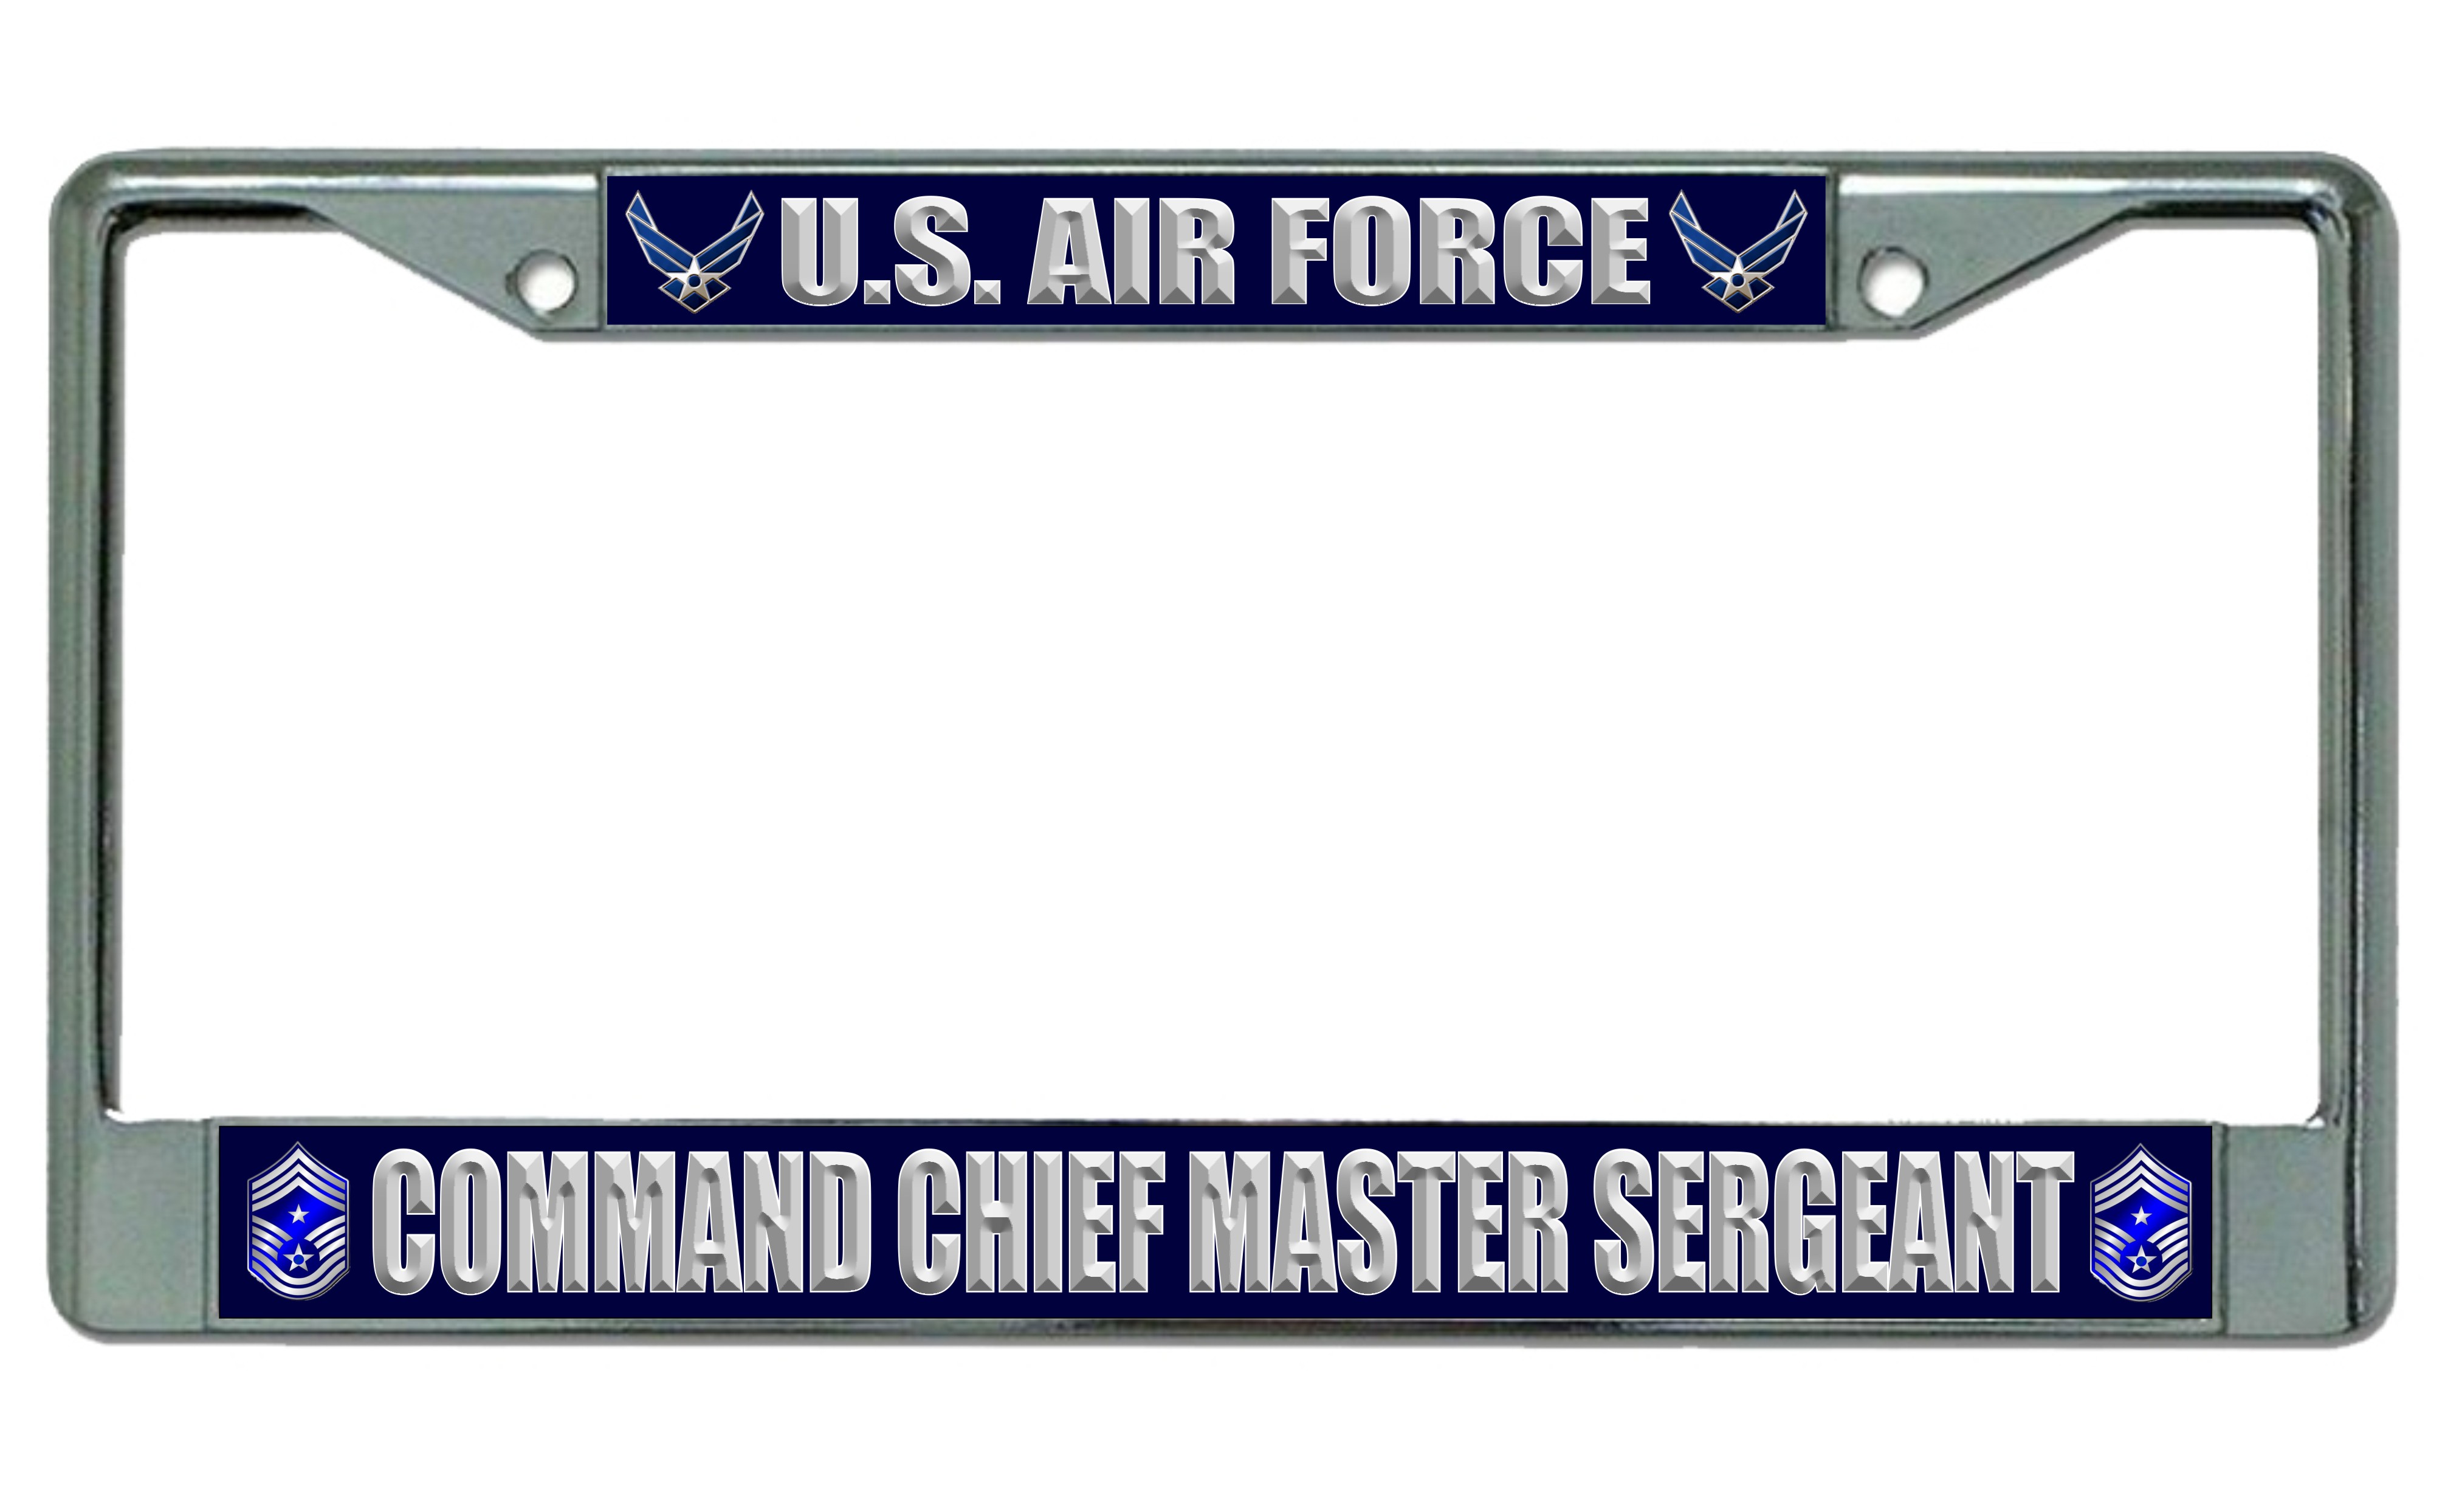 U.S. Air Force Command Chief Master Sergeant FRAME